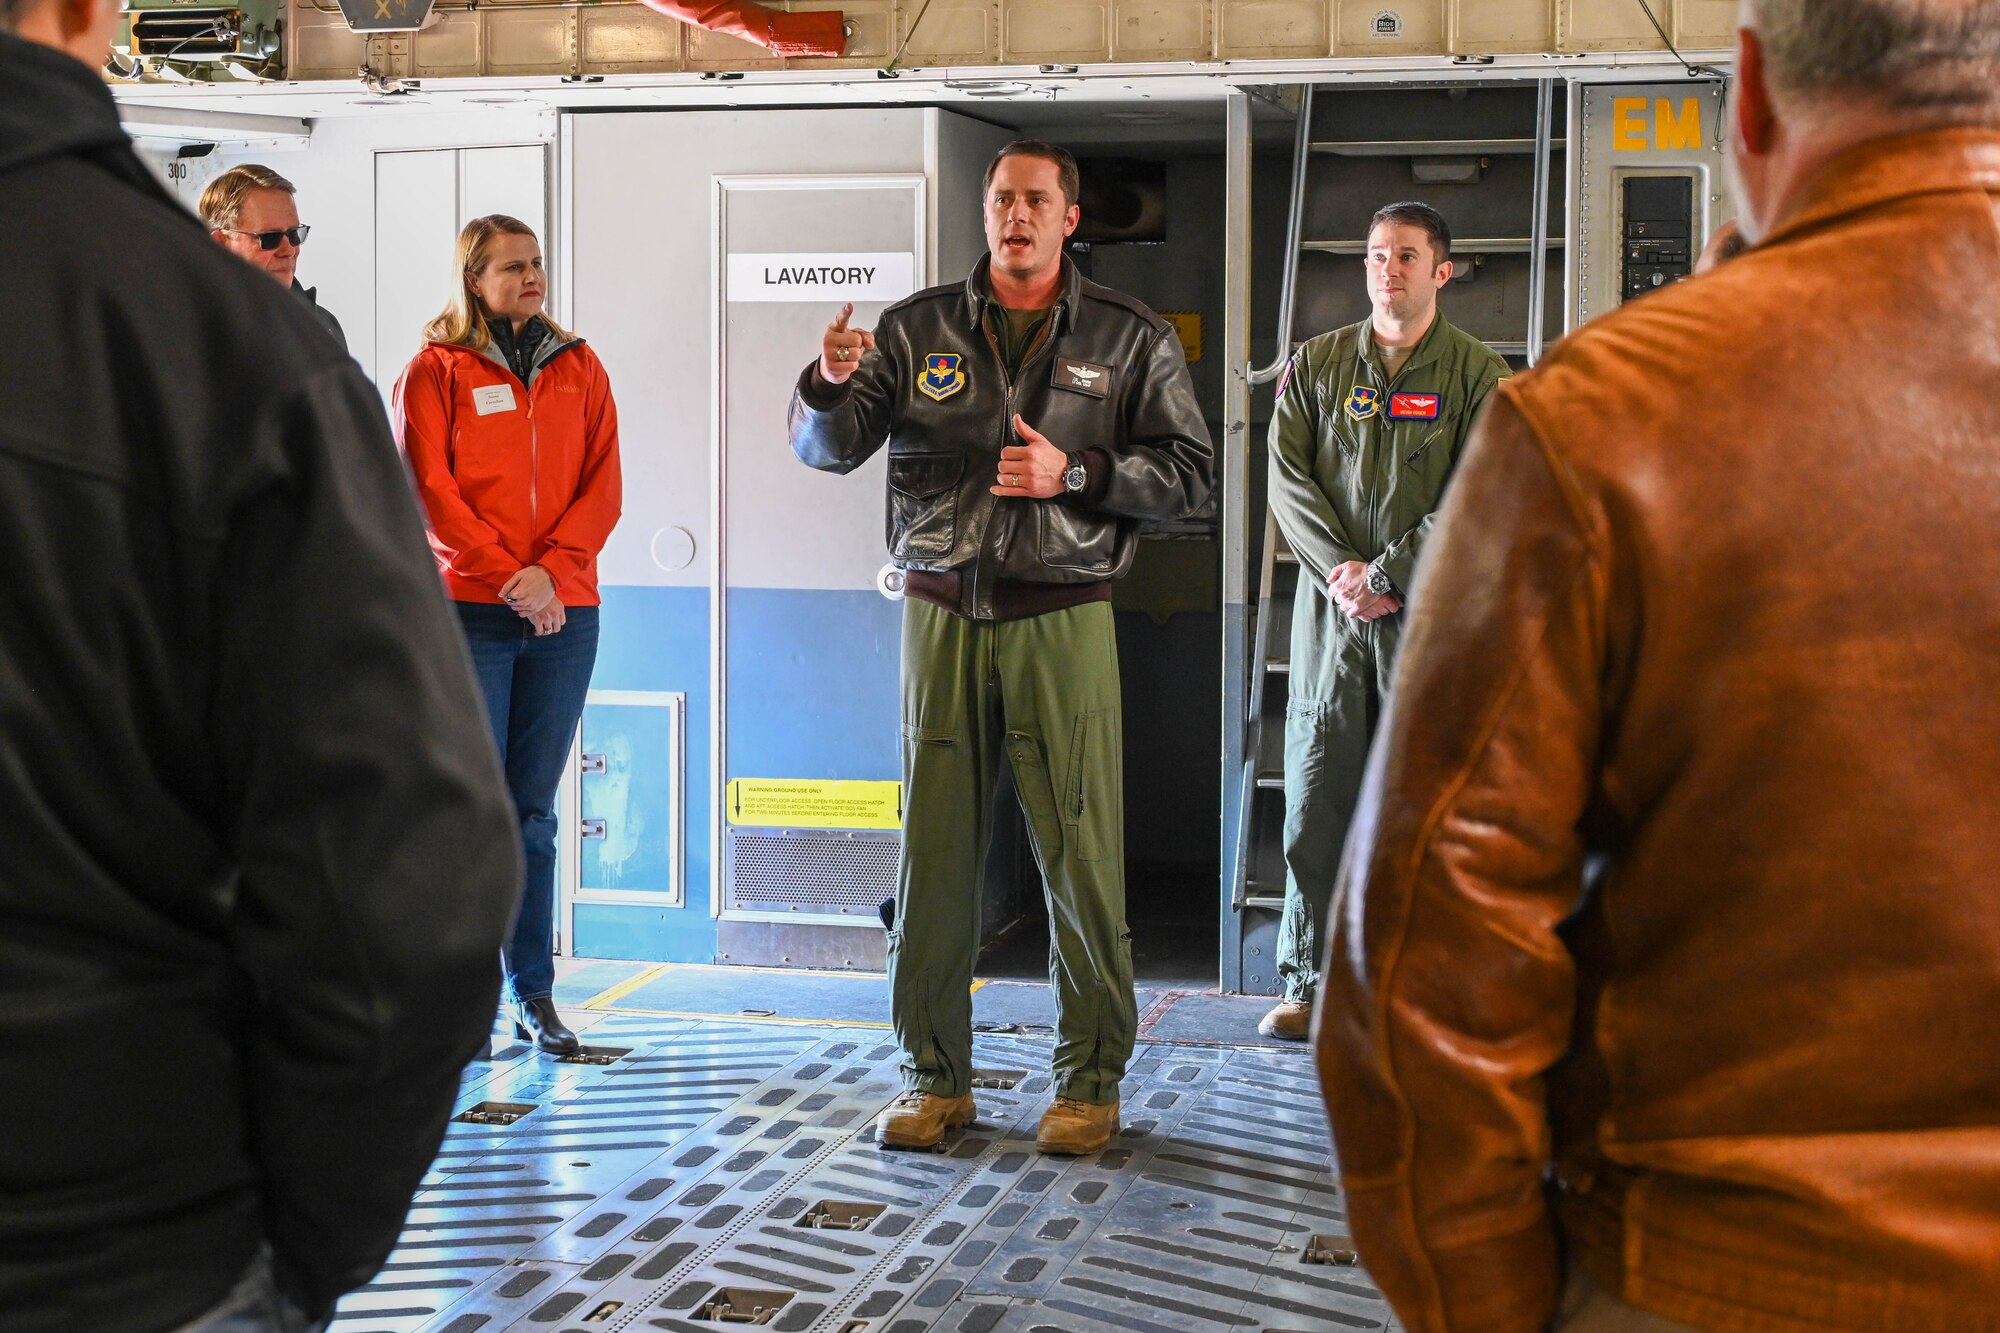 U.S. Air Force Lt. Col. John Shaw, 58th Airlift Squadron director of operations, educates the tour participants about the C-17 Globemaster III to members of Leadership Oklahoma at Altus Air Force Base (AFB), Oklahoma, March 14, 2023. Shaw gave an overview of C-17 capabilities and training, including some of the day-to-day operations that occur at Altus AFB. (U.S. Air Force photo by Senior Airman Trenton Jancze)